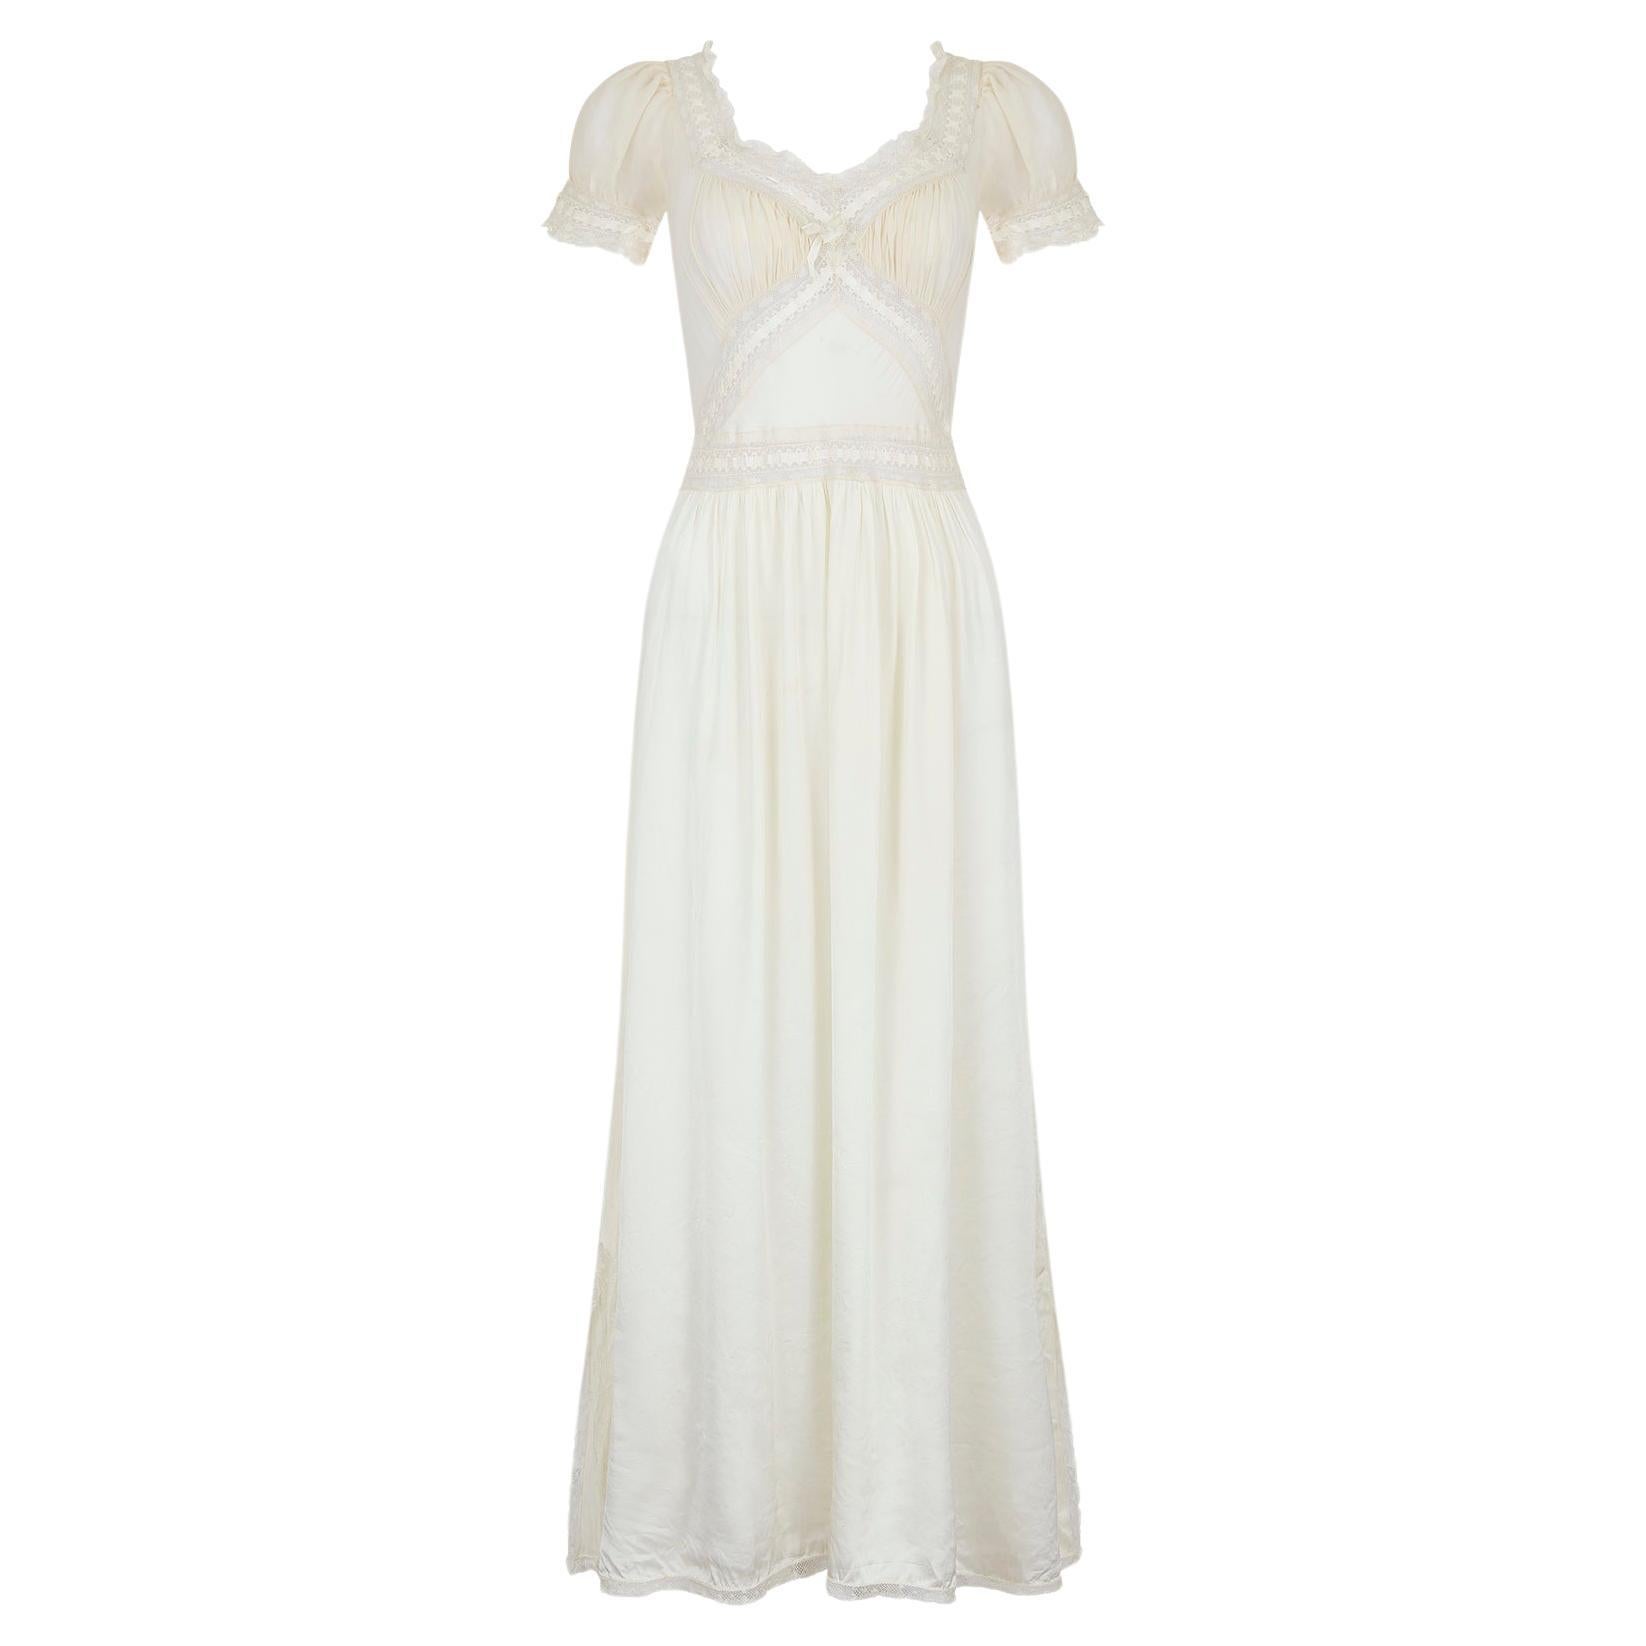 1930s White Charmeuse Rayon Dress with Lace Inserts